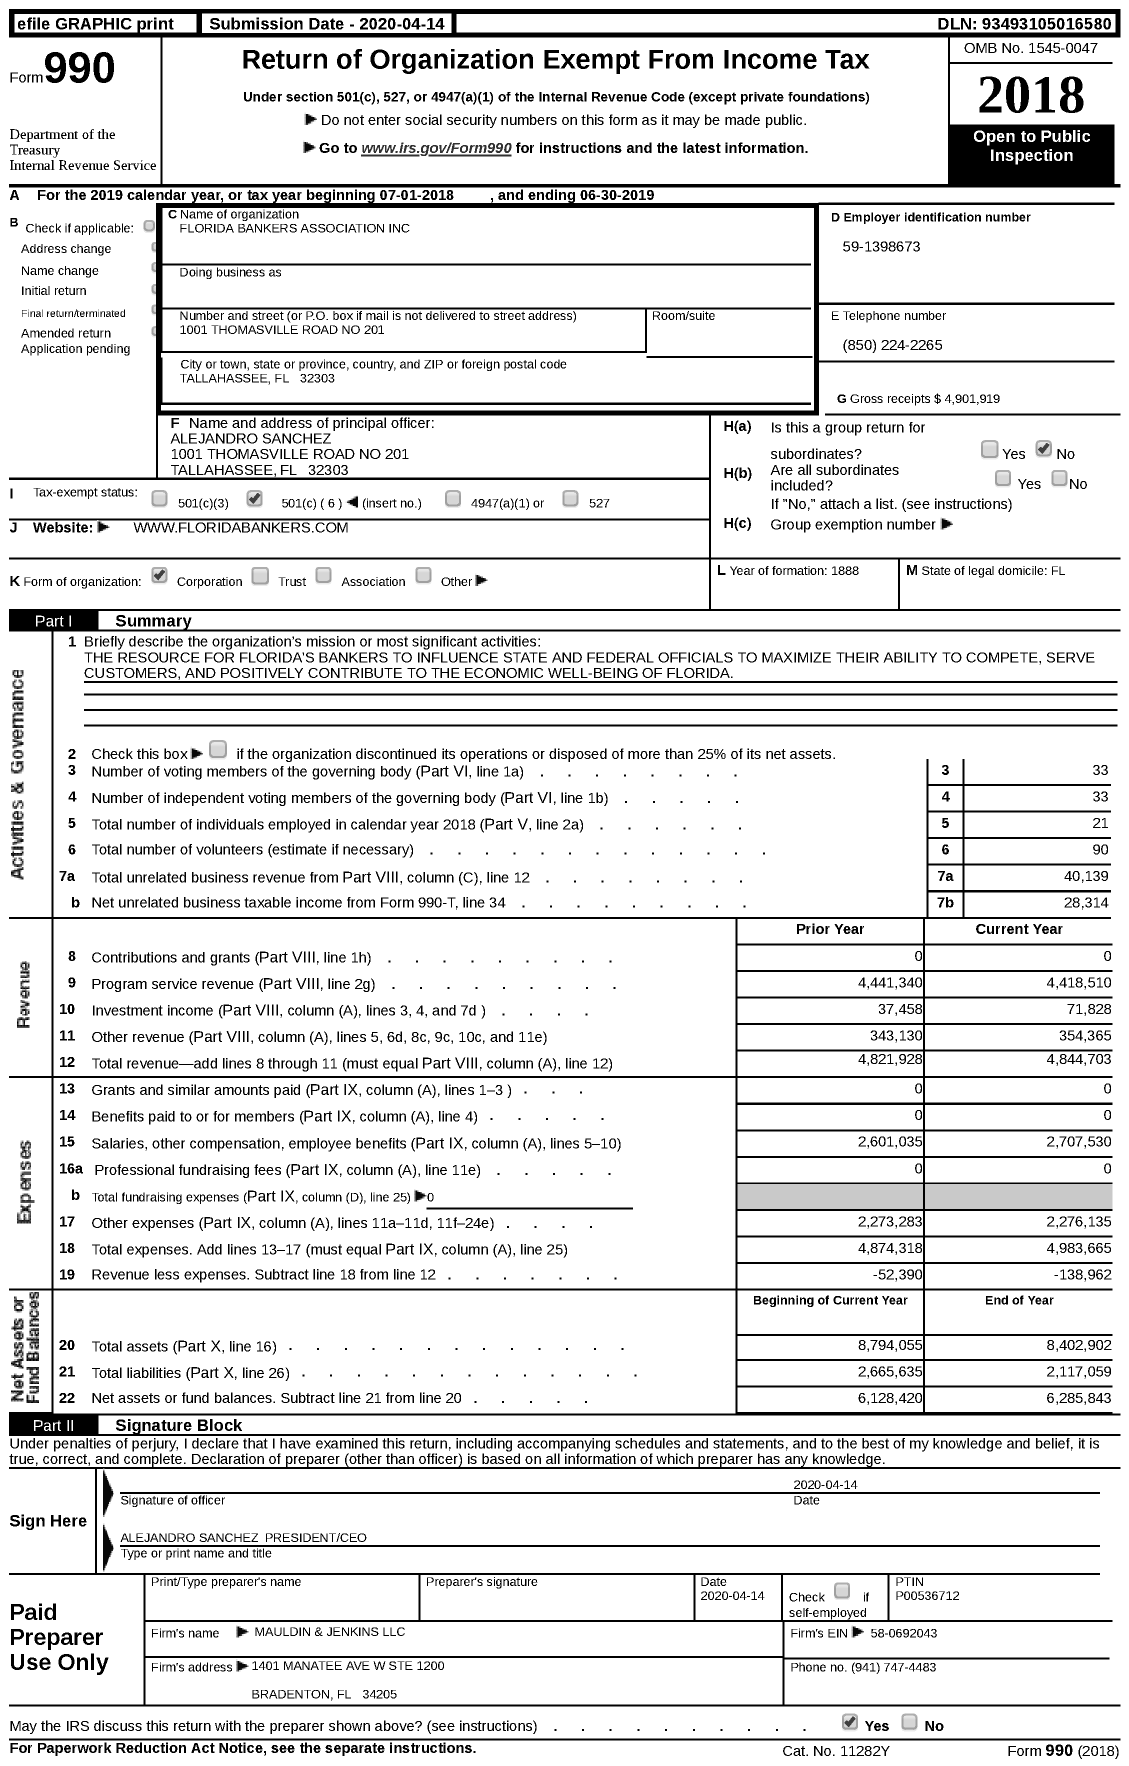 2019 Form 990 for Florida Bankers Association Cause IQ